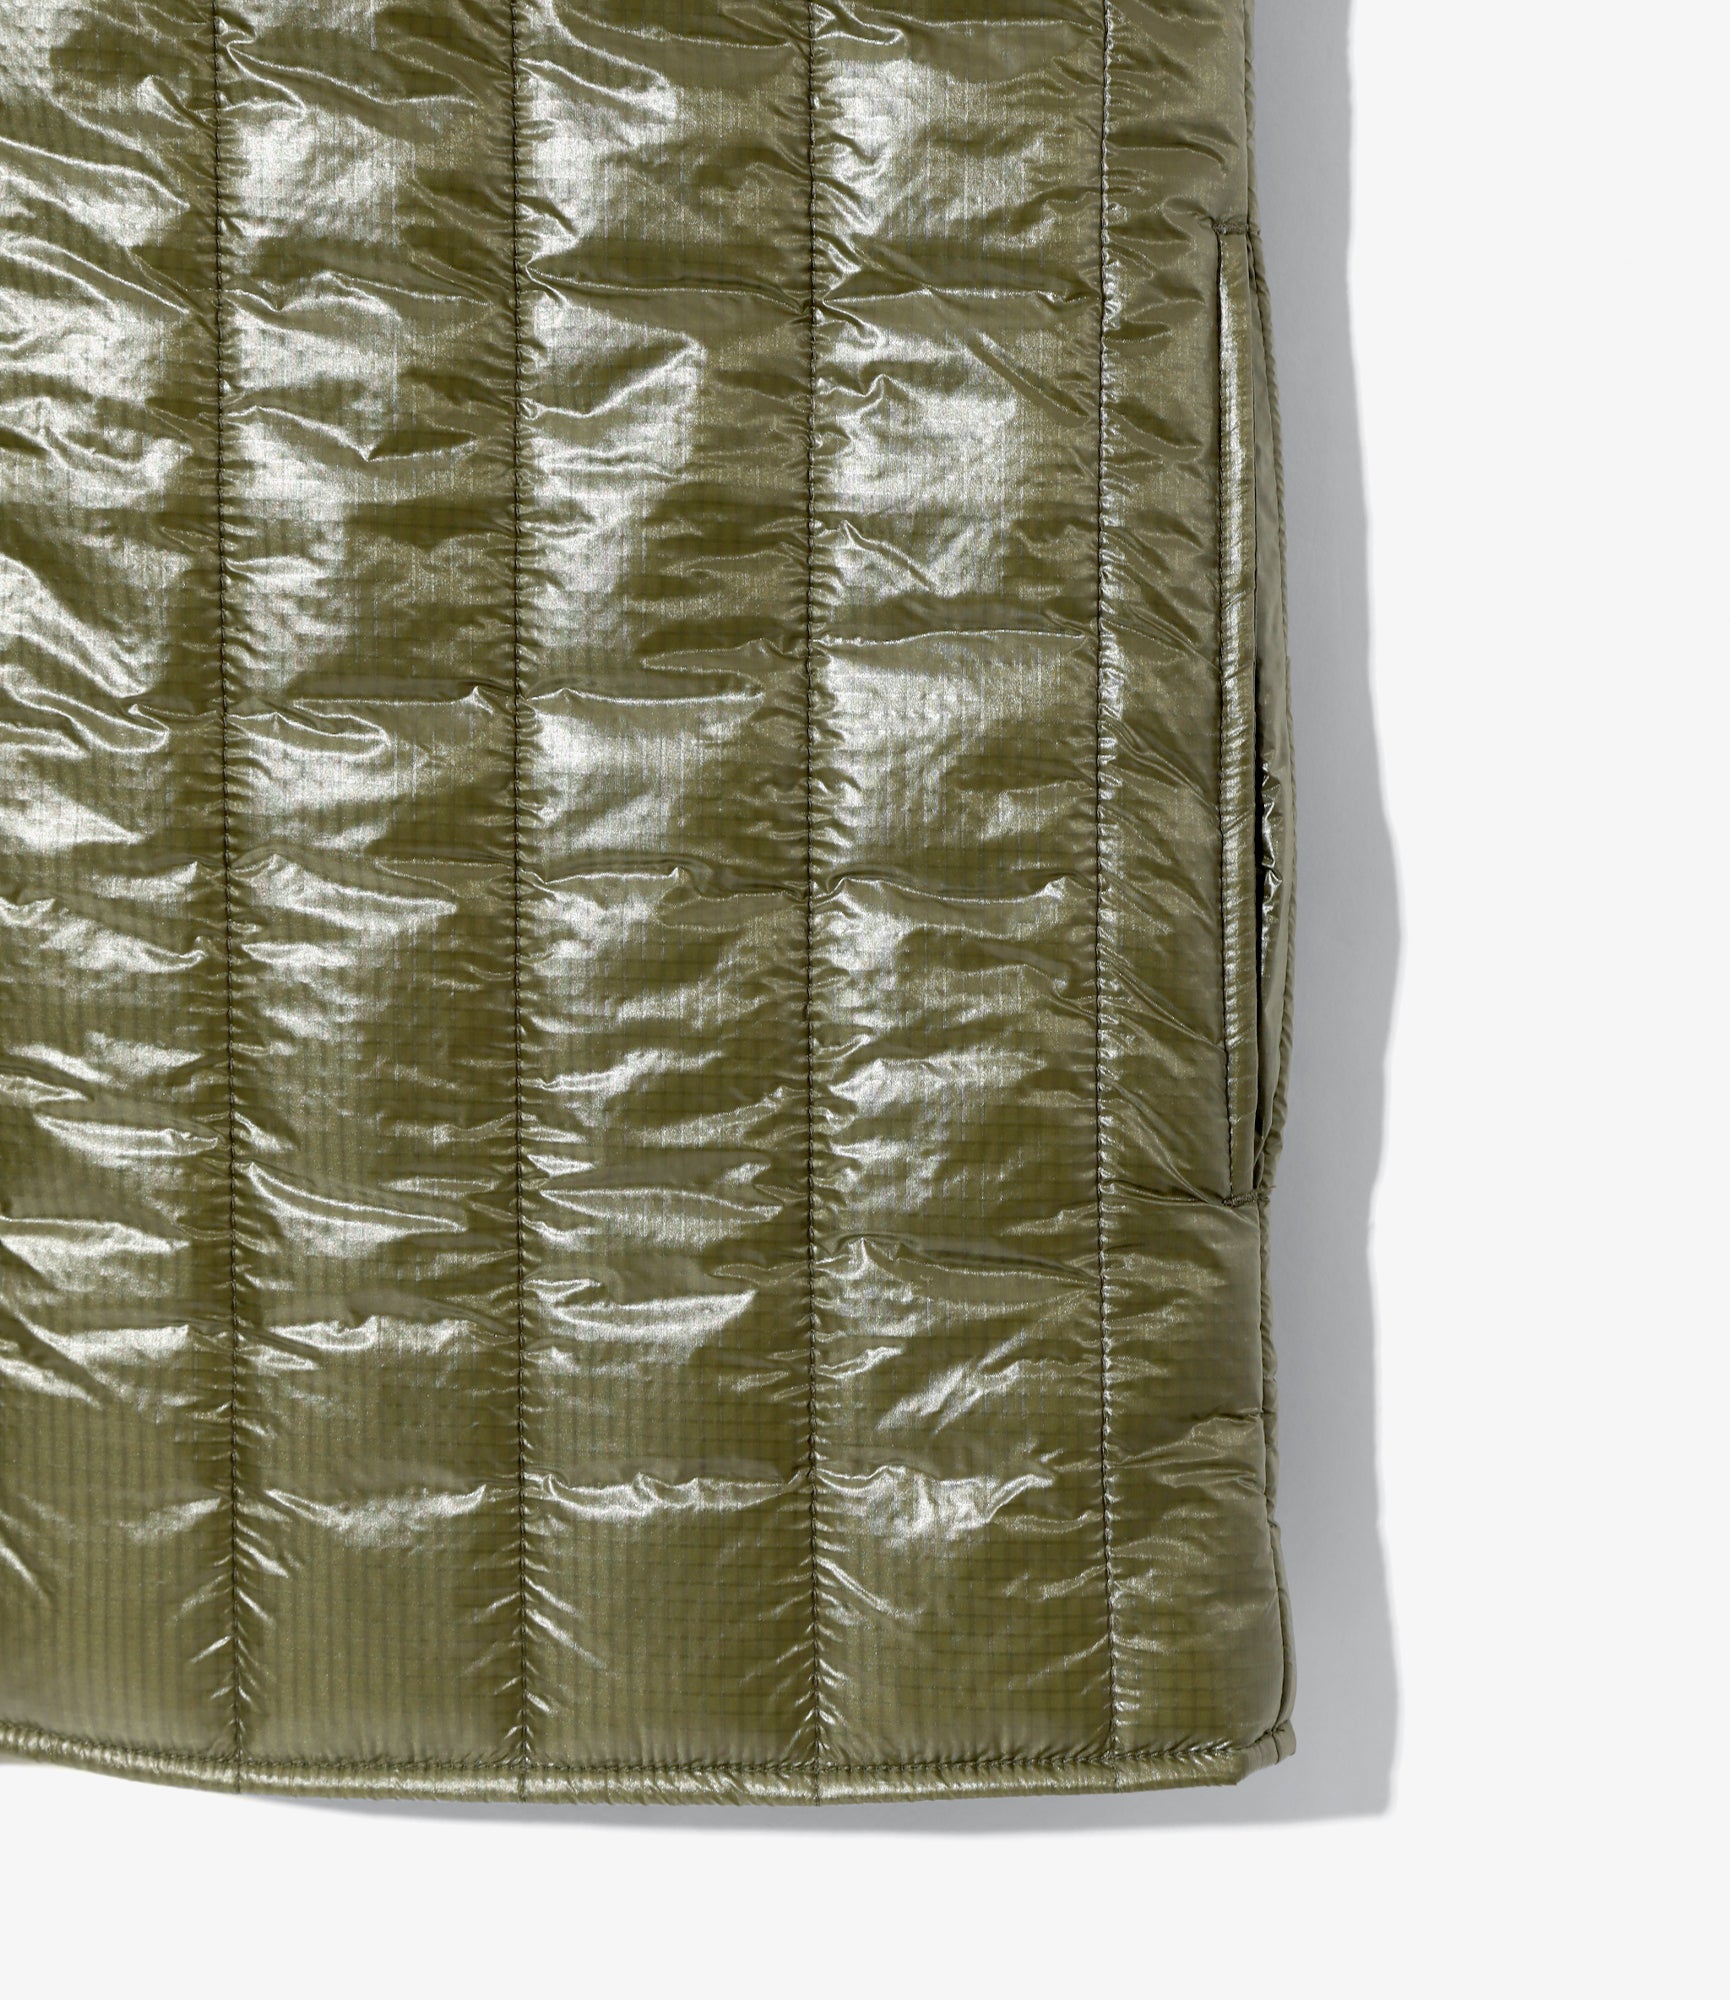 South2 West8 Quilted Crew Neck Vest - Nylon Ripstop - Olive